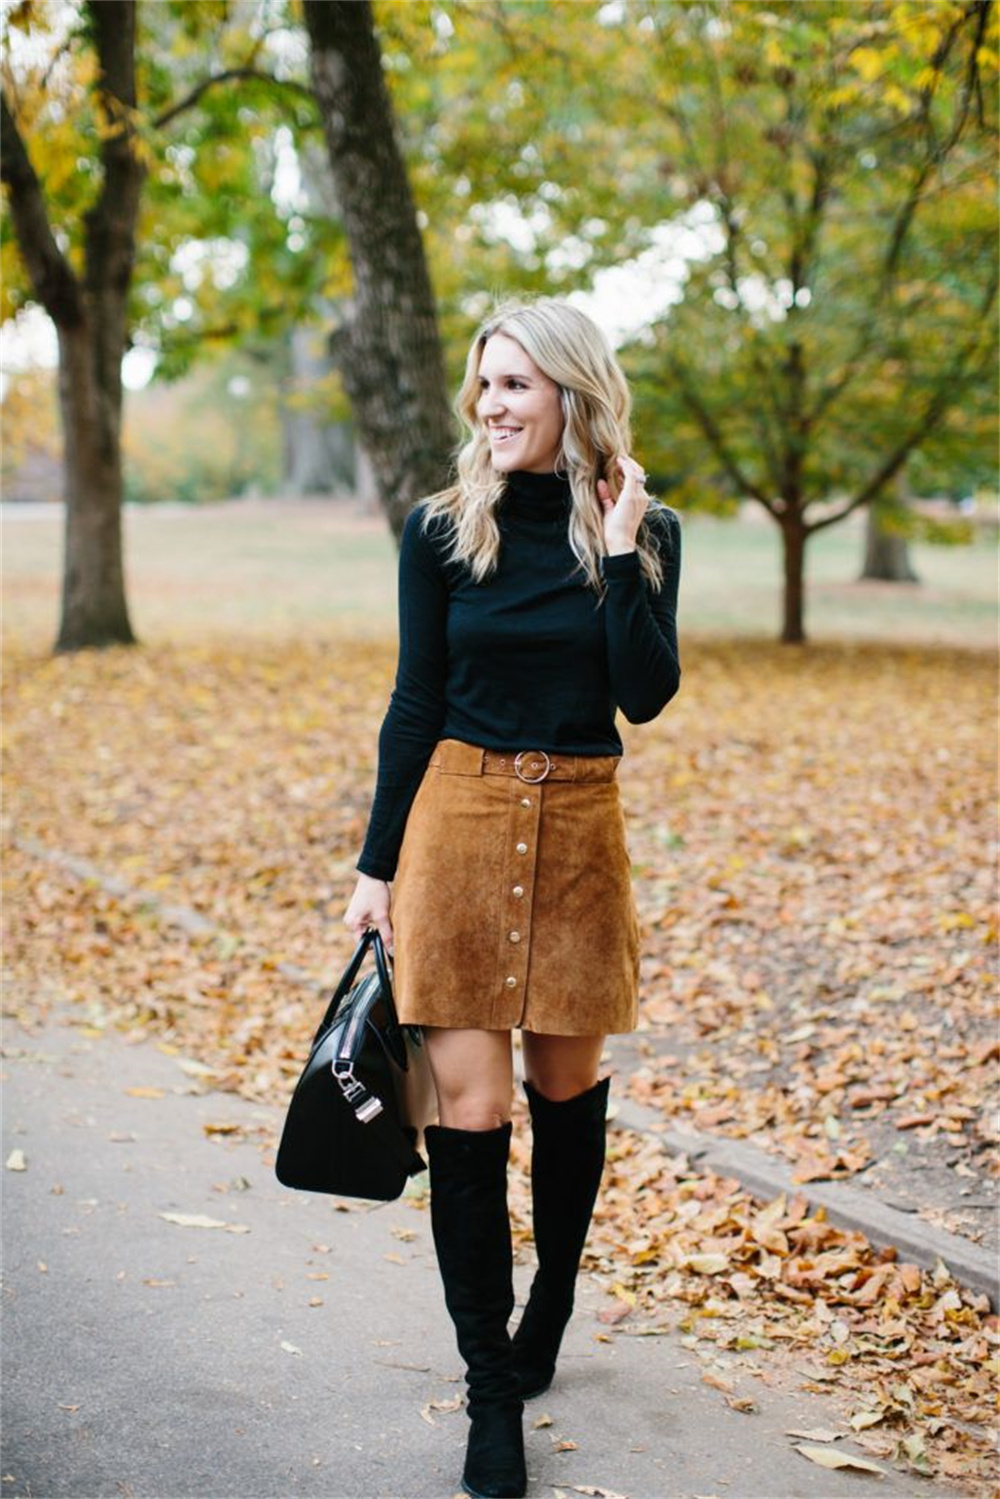 chic suede skirt and knee-high boots outfit for fall